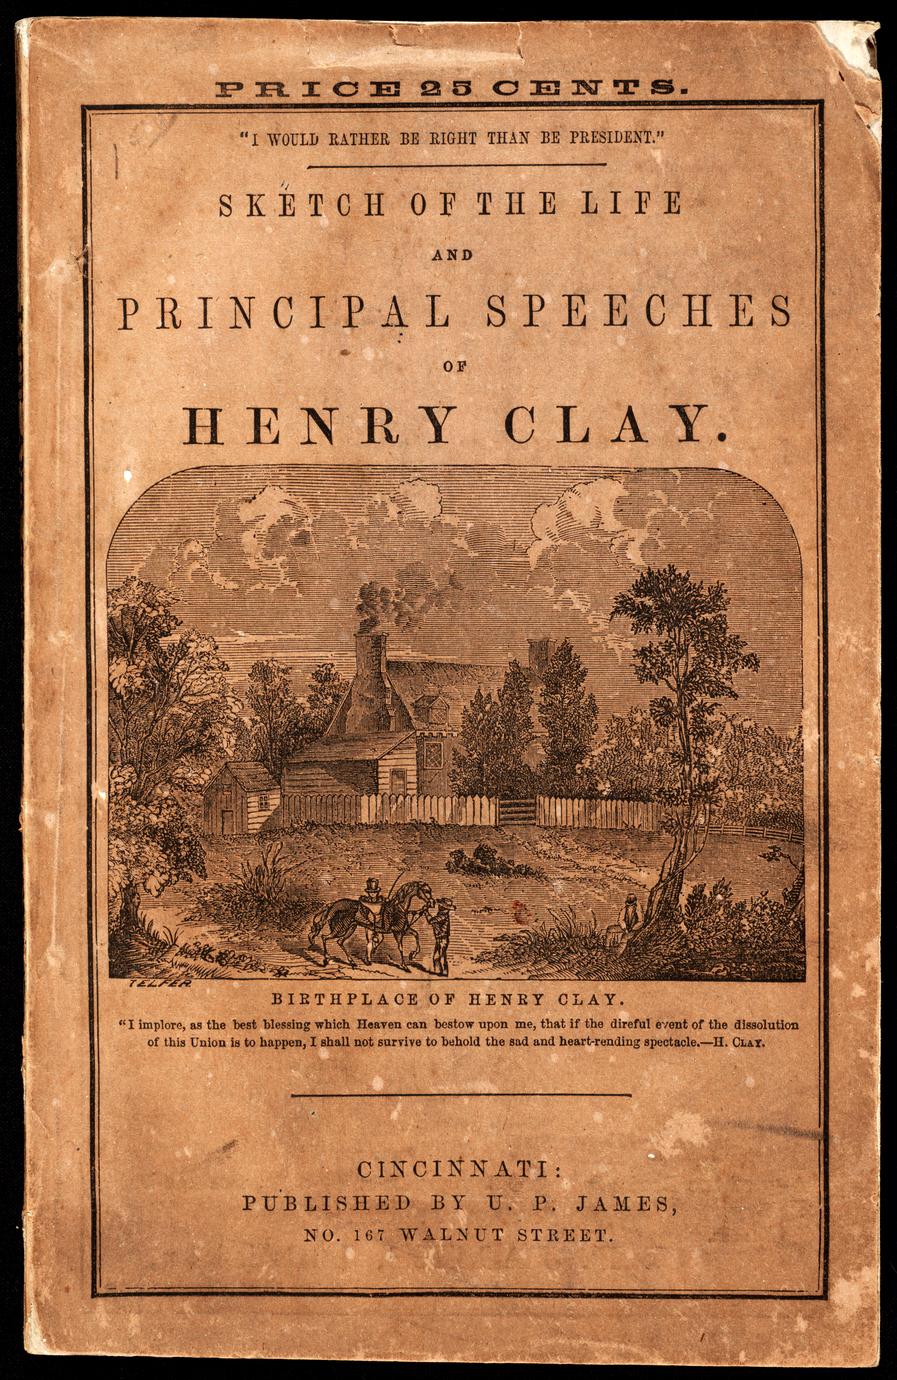 Sketch of the life and some of the principal speeches of Henry Clay (1 of 4)